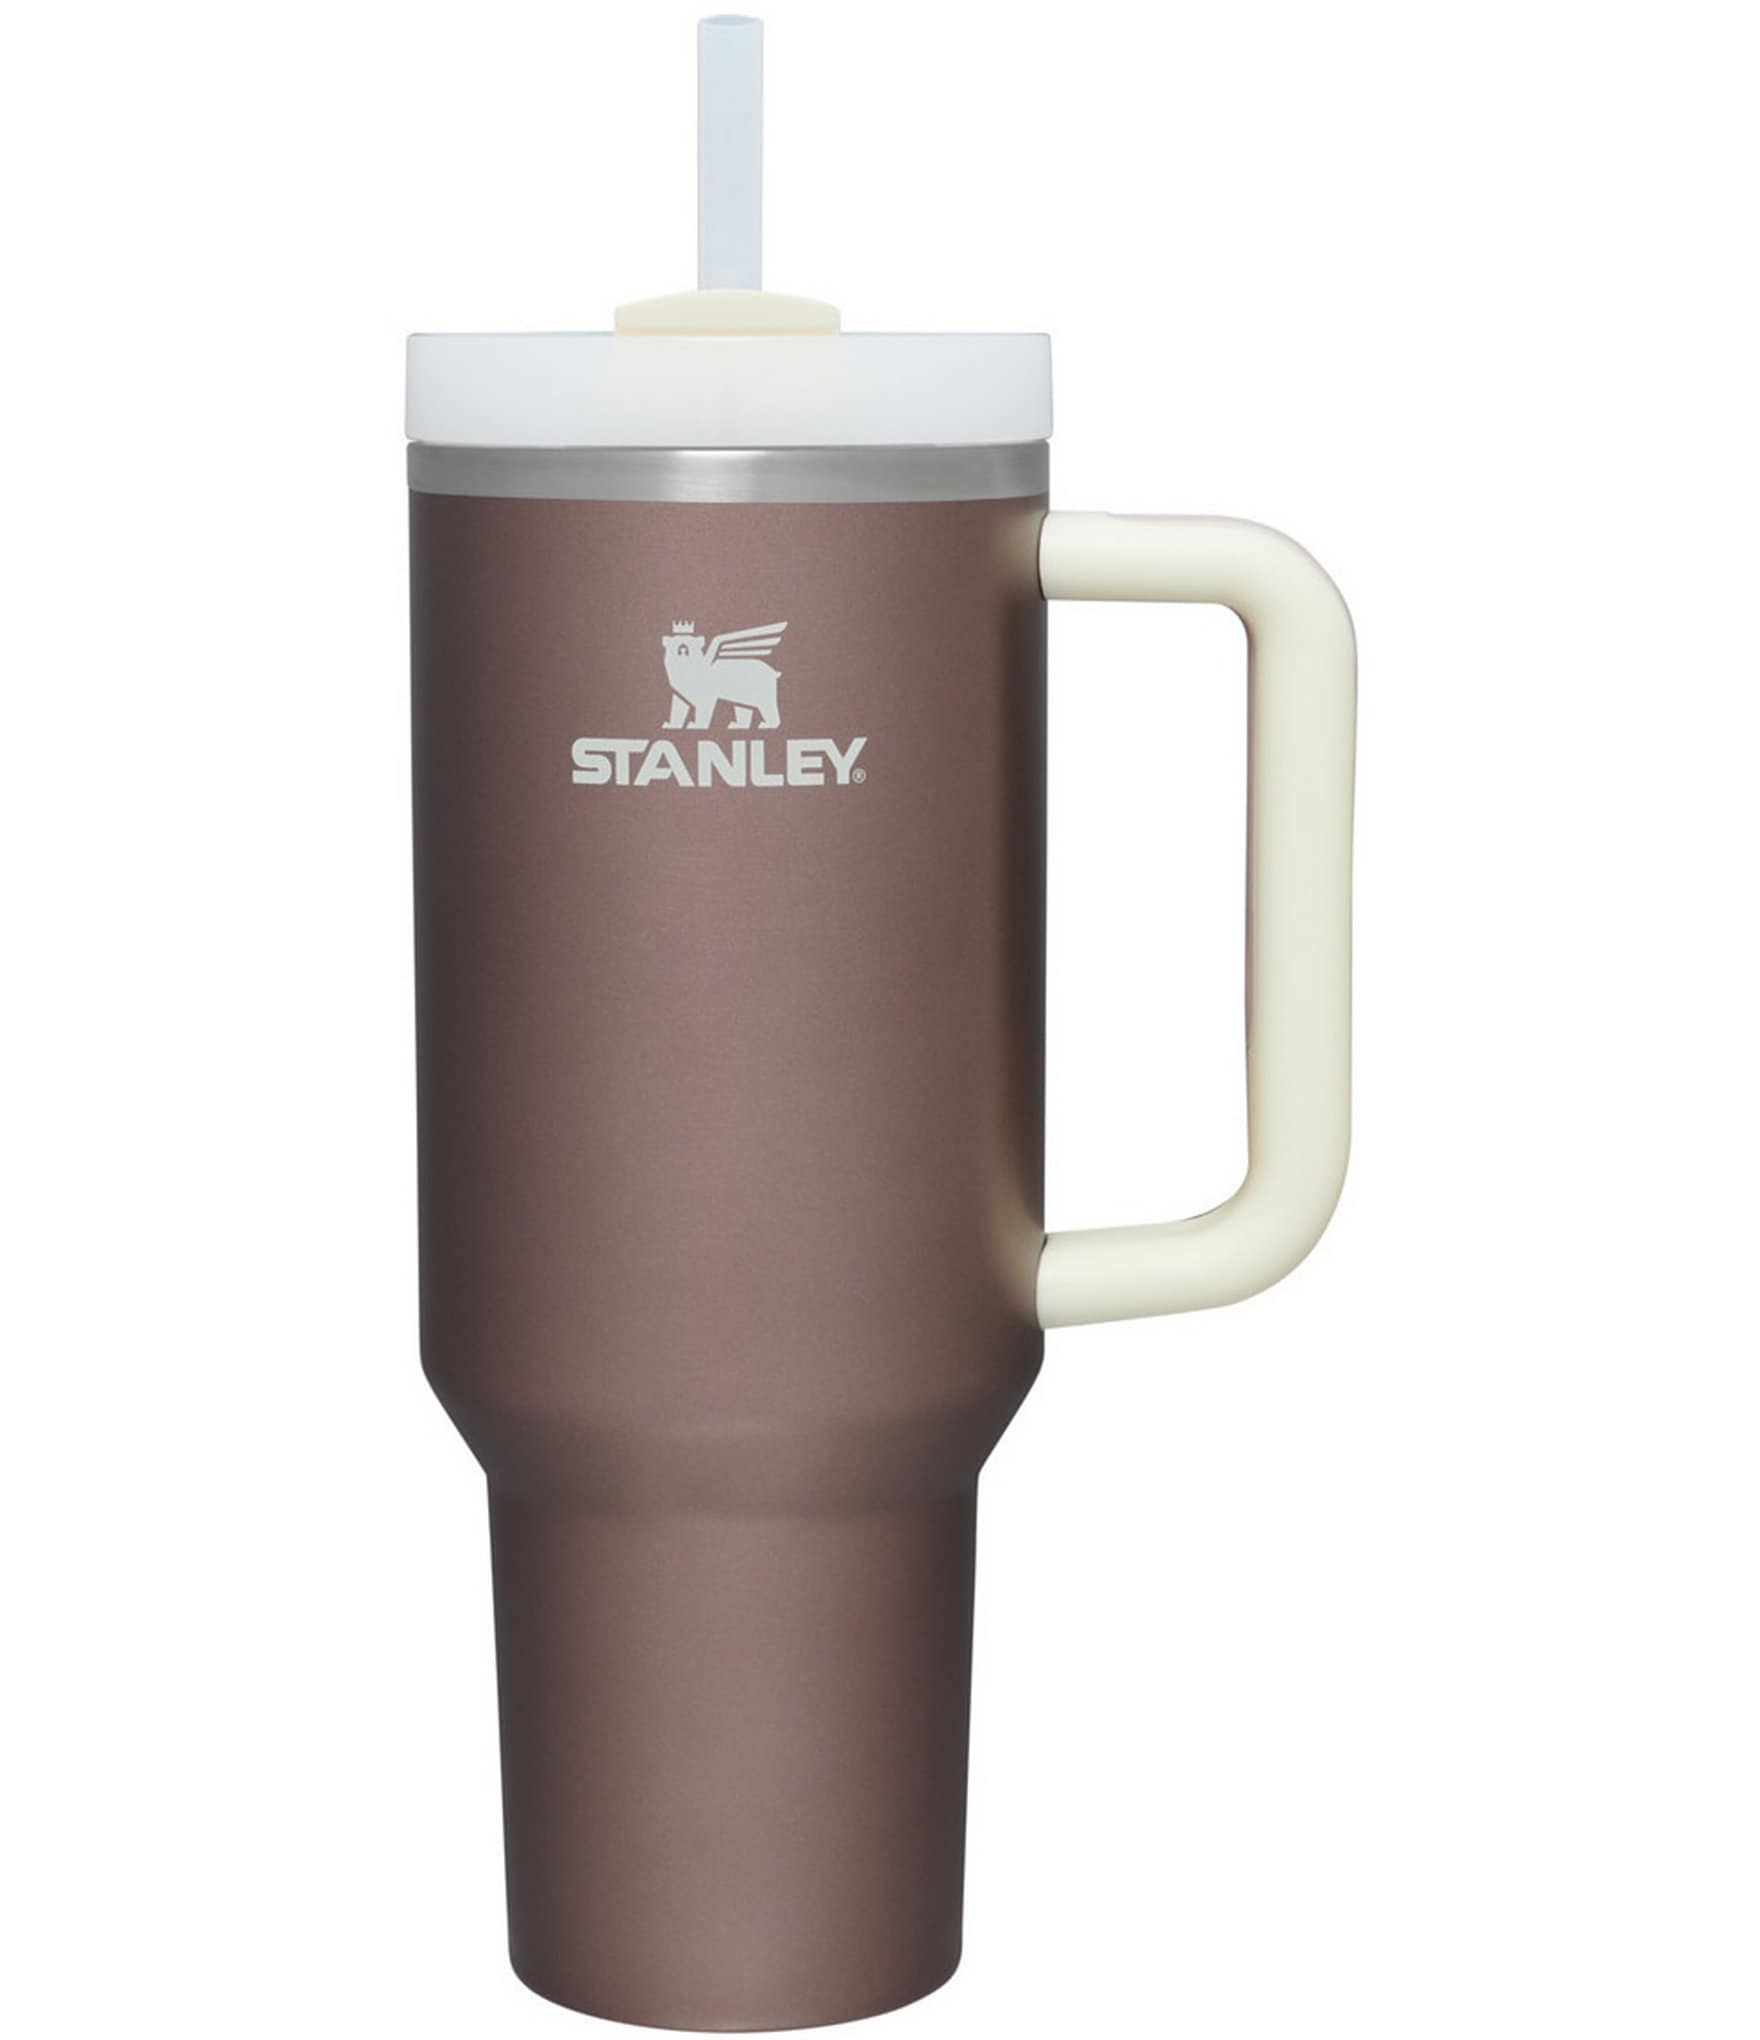 https://dimg.dillards.com/is/image/DillardsZoom/zoom/stanley-the-quencher-h2.0-flowstate-rose-quartz-glow-tumbler-40-oz./00000000_zi_2bf9c12d-9fb3-4ca2-9a6a-45d64ffb641e.jpg